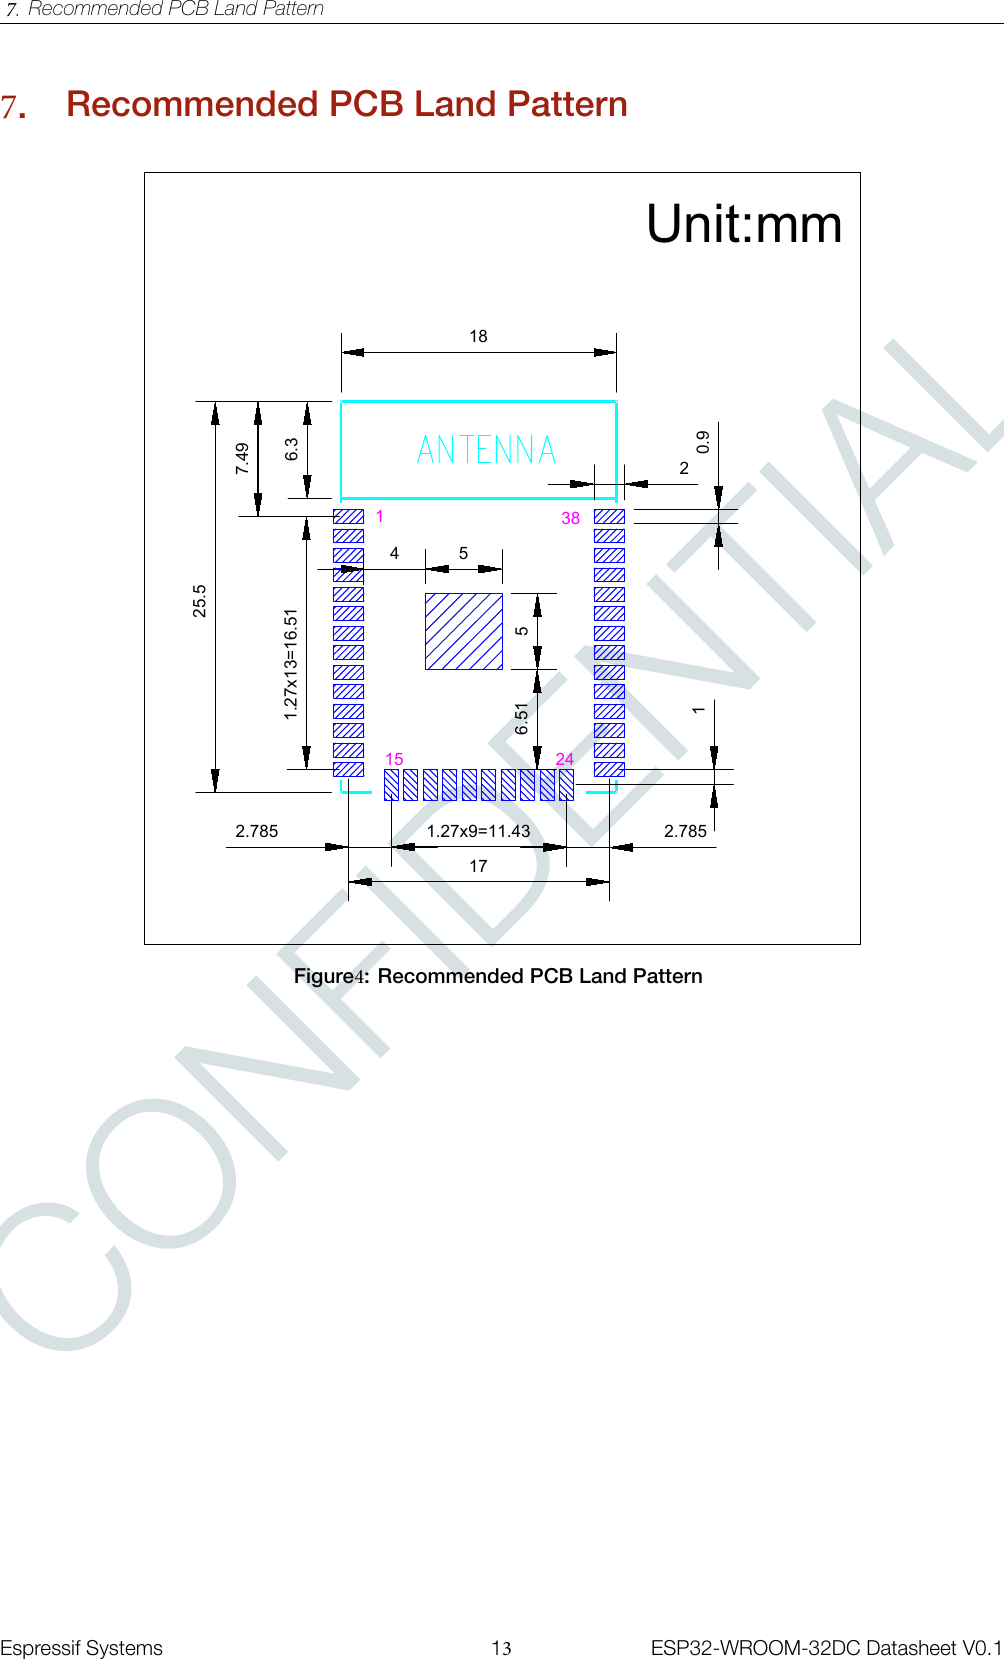 CONFIDENTIAL7.Recommended PCB Land Pattern7.Recommended PCB Land Pattern25.5181.27x13=16.511.27x9=11.432.785126.3177.492.785550.9115 2438Unit:mm6.514Figure4: Recommended PCB Land PatternEspressif Systems 13ESP32-WROOM-32DC Datasheet V0.1